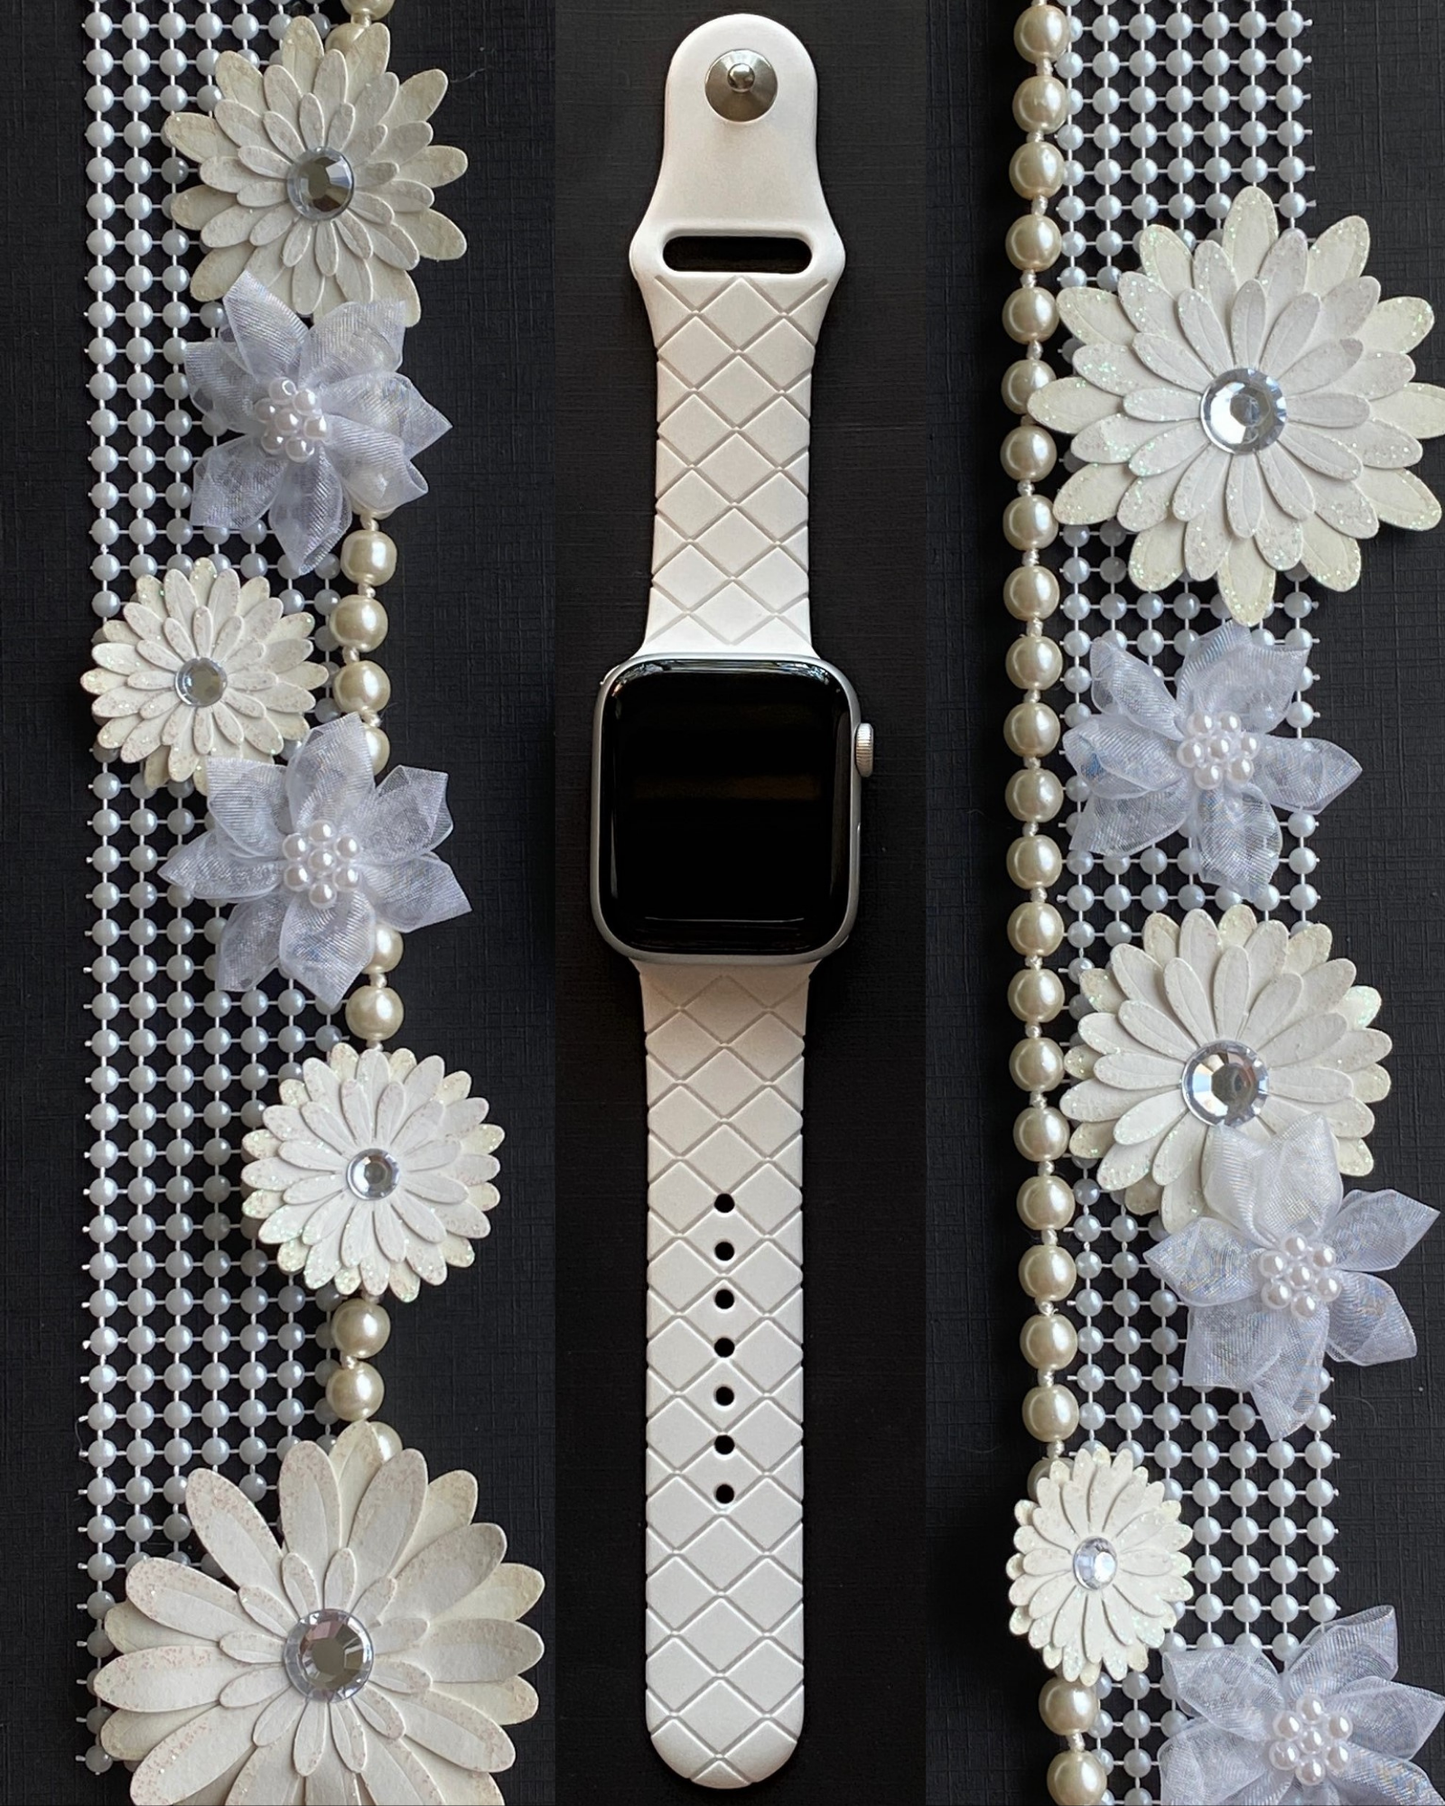 BORN TO BE SUPREME APPLE WATCH BAND